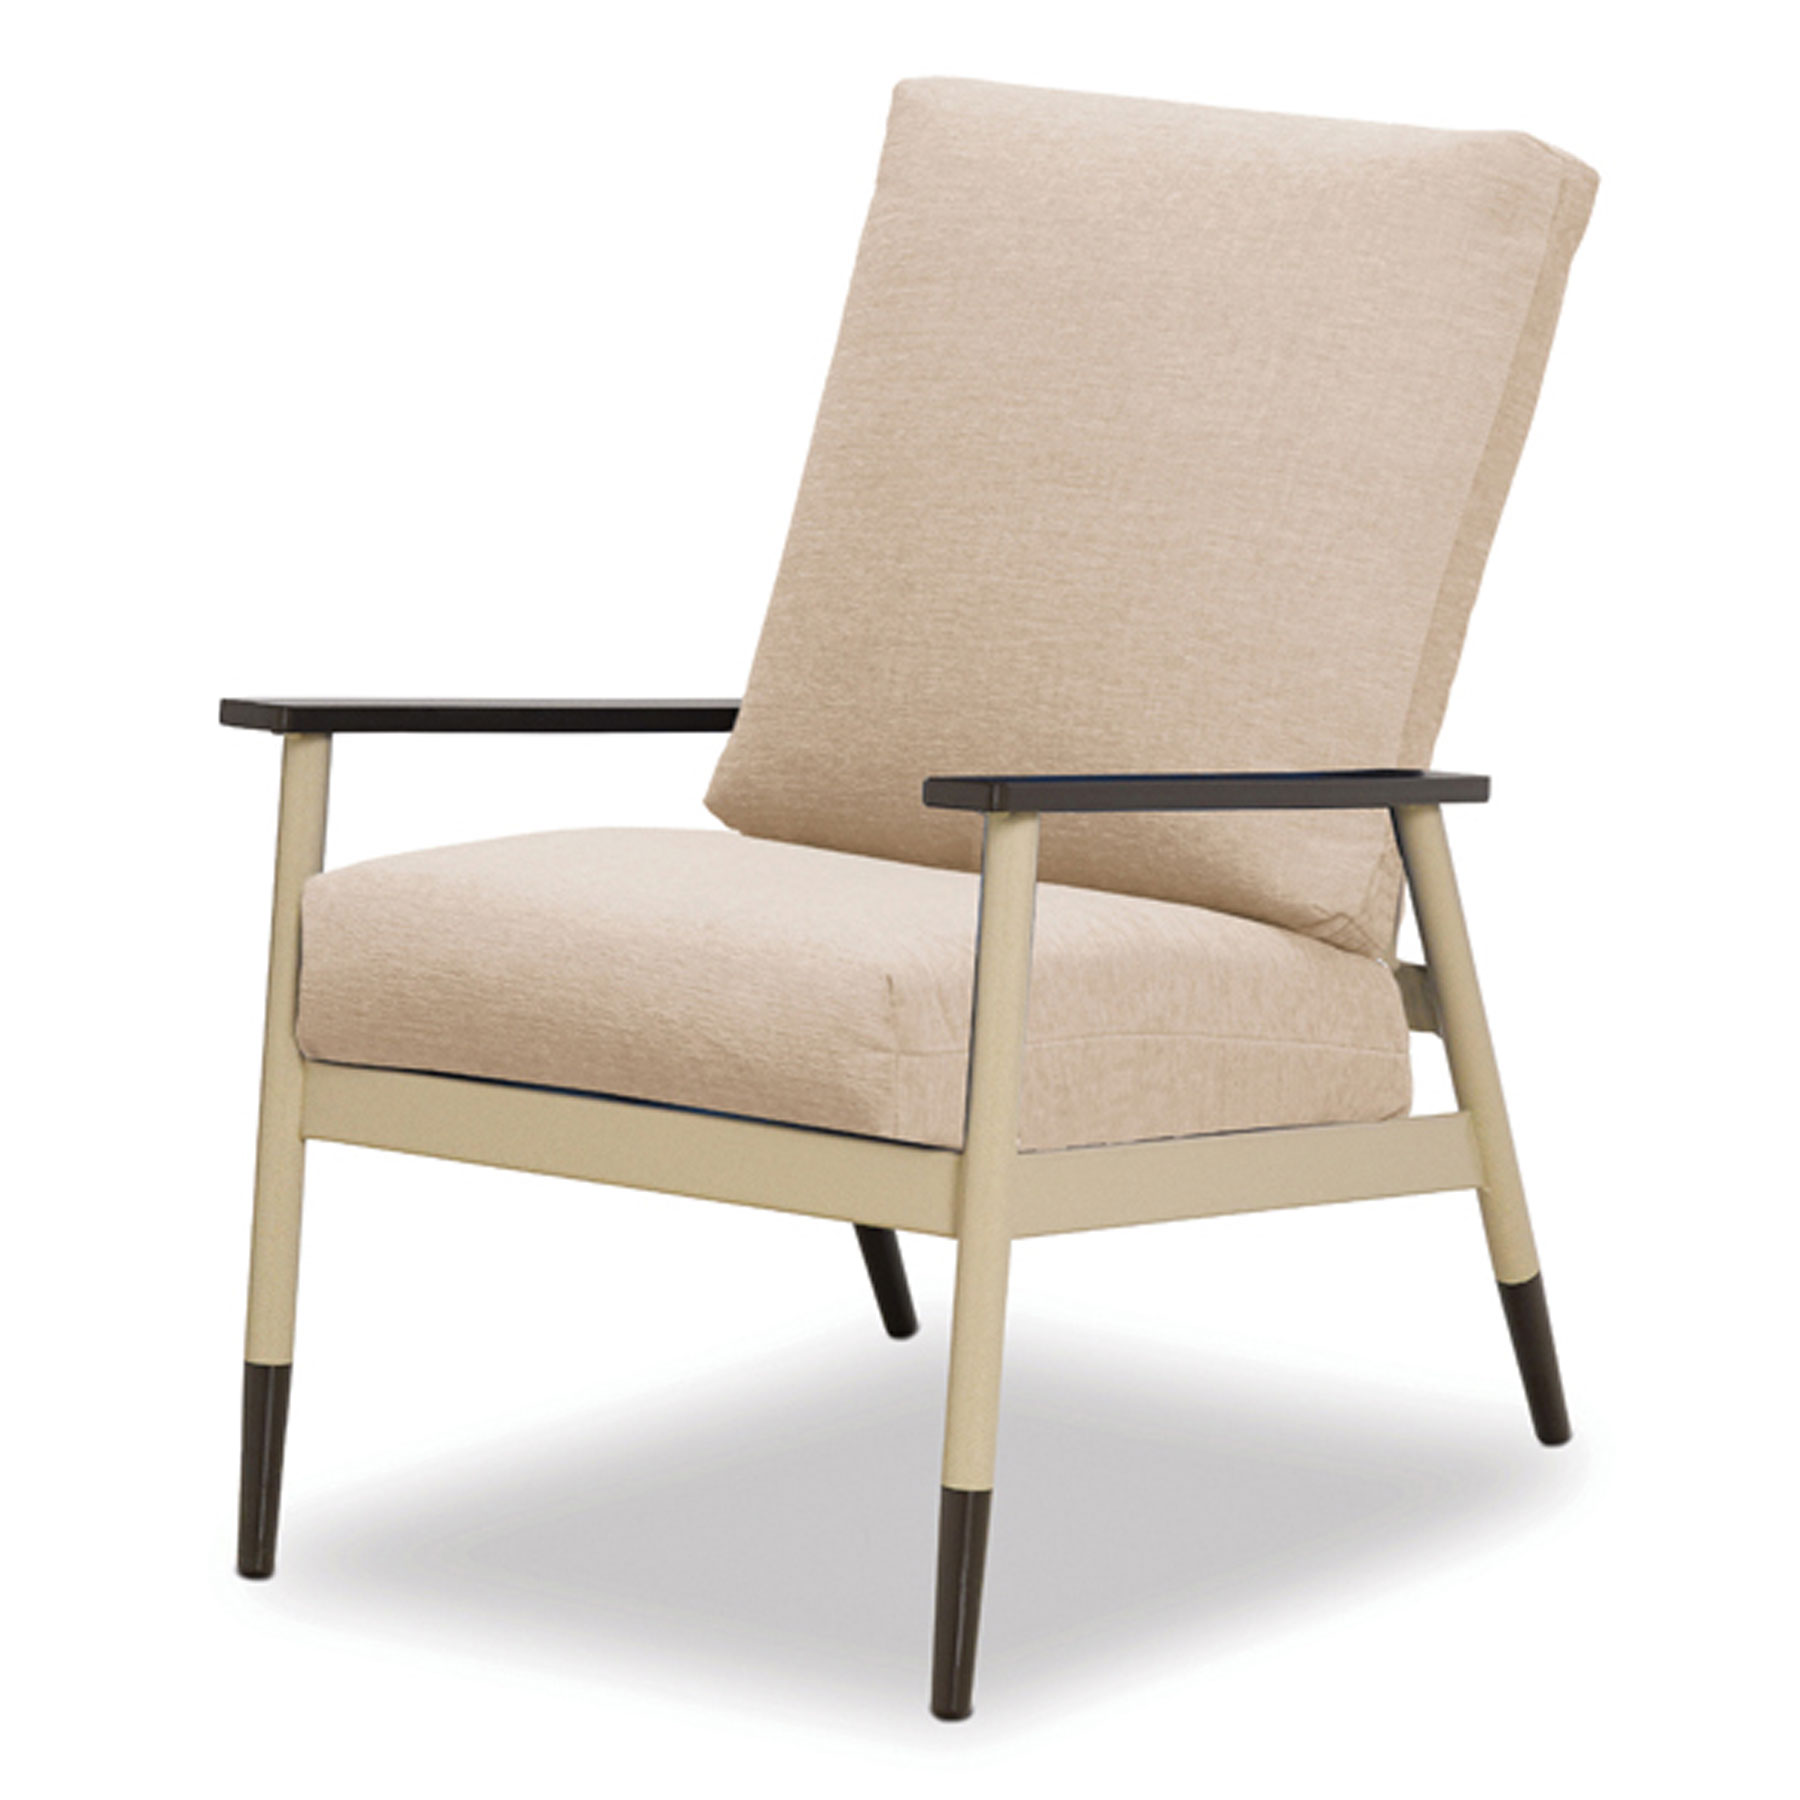 Telescope Casual Welles Cushion Arm Chair without Welting